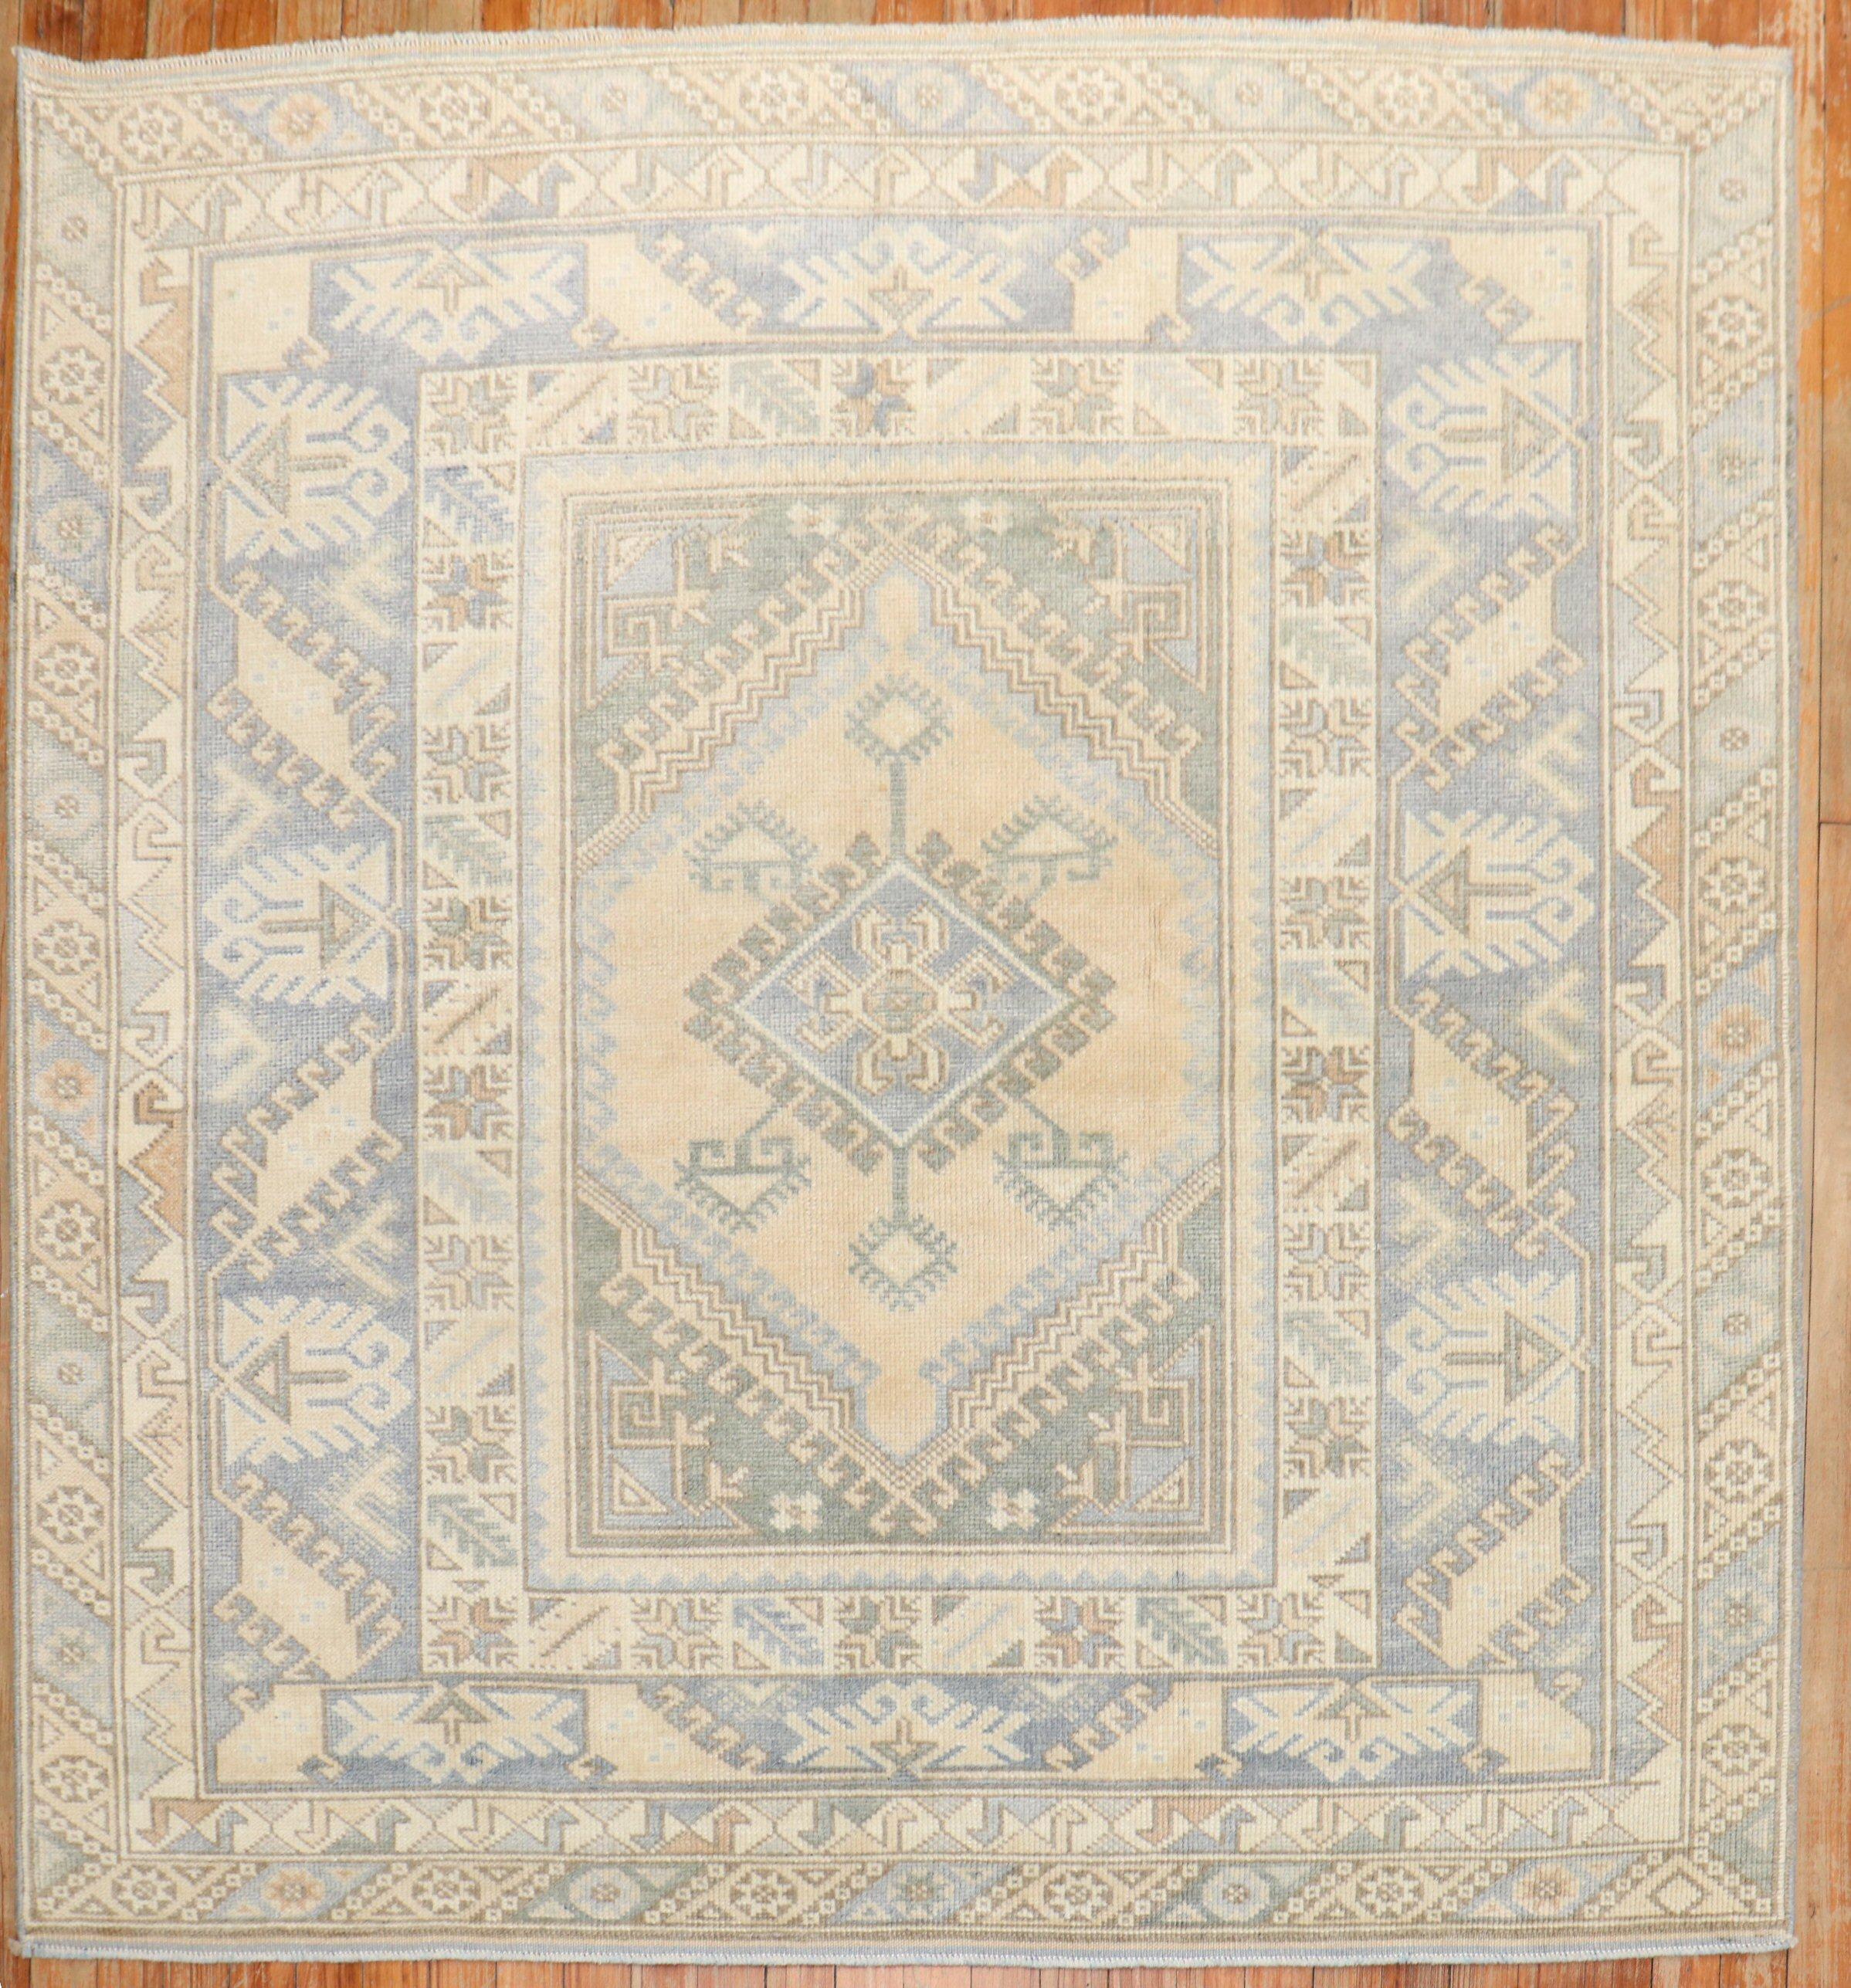 Highly decorative small square-shaped Vintage Turkish Konya Rug from the middle of the 20th century.

Measures: 5' x 5'1''